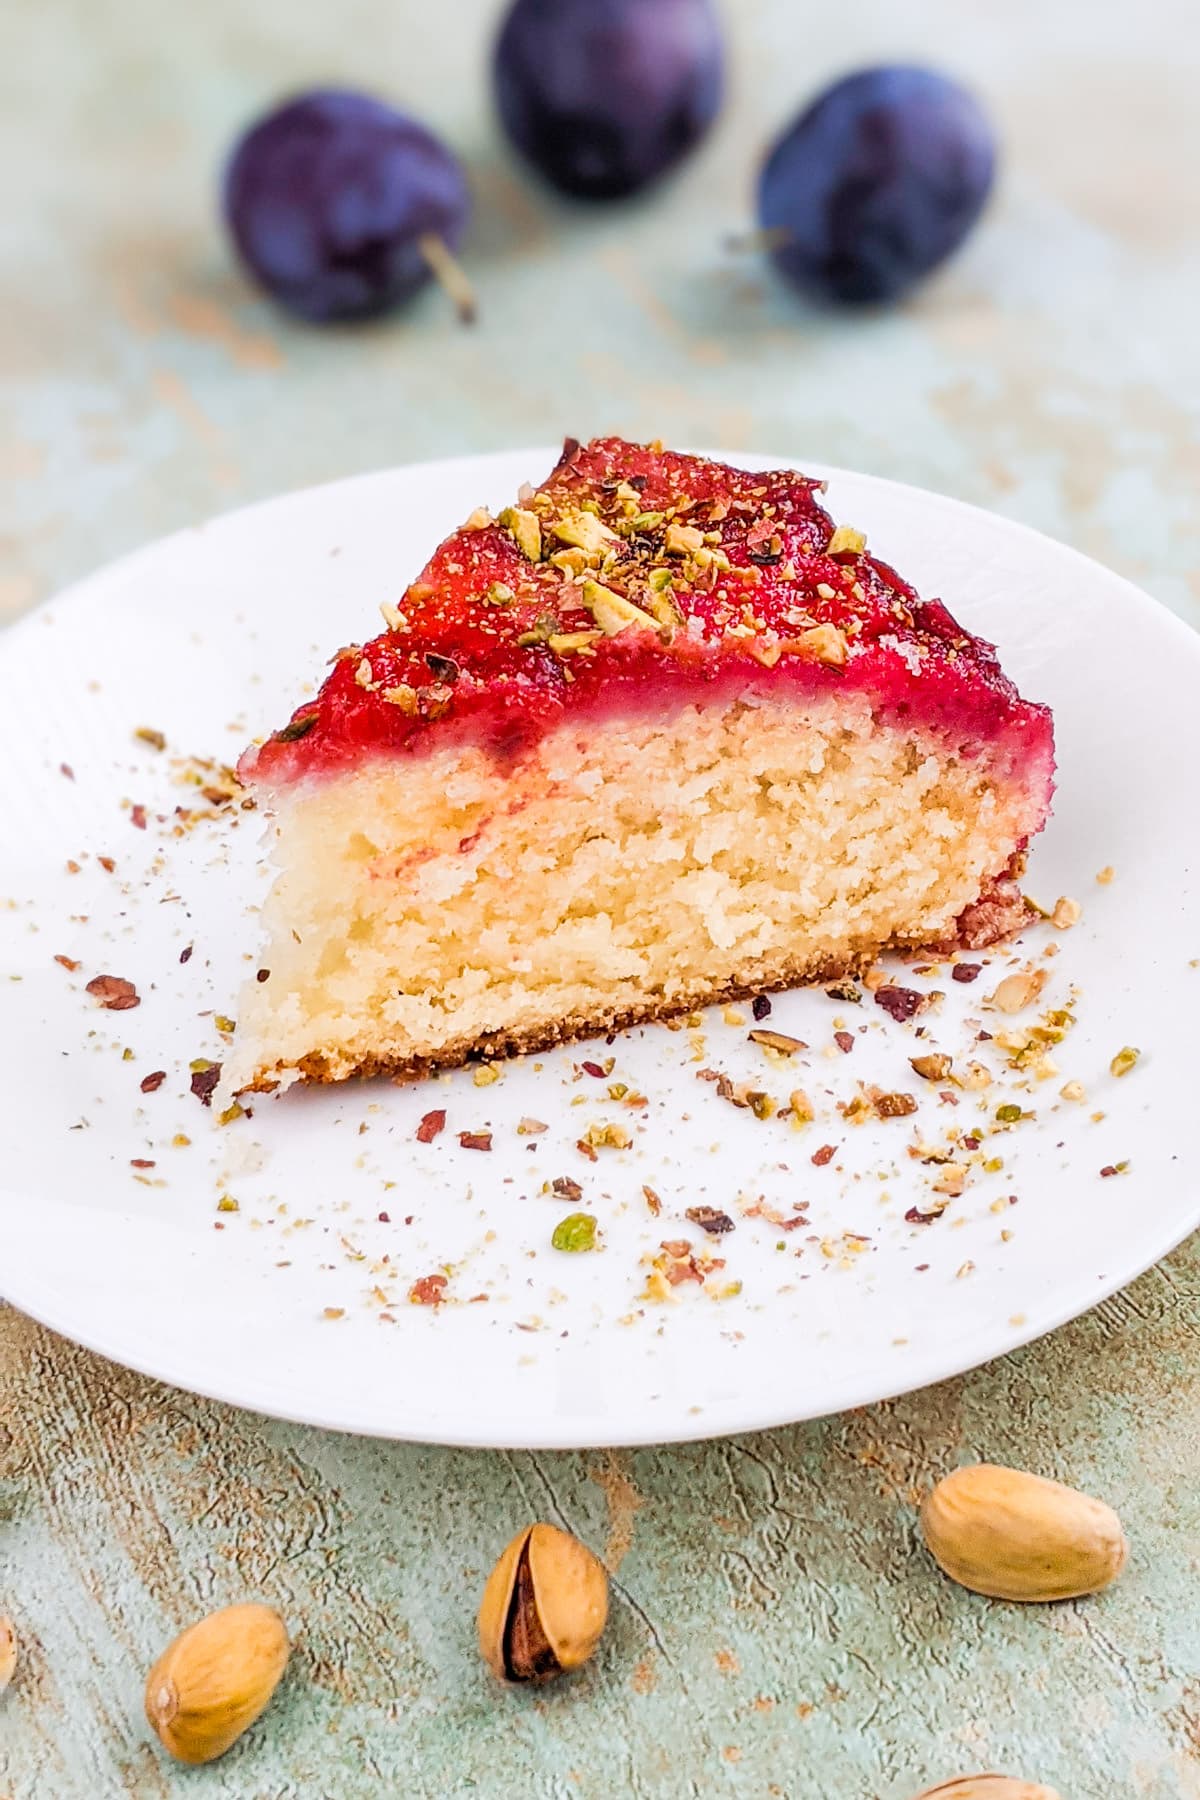 Slice of yogurt plum cake with crushed pistachios on a white plate.